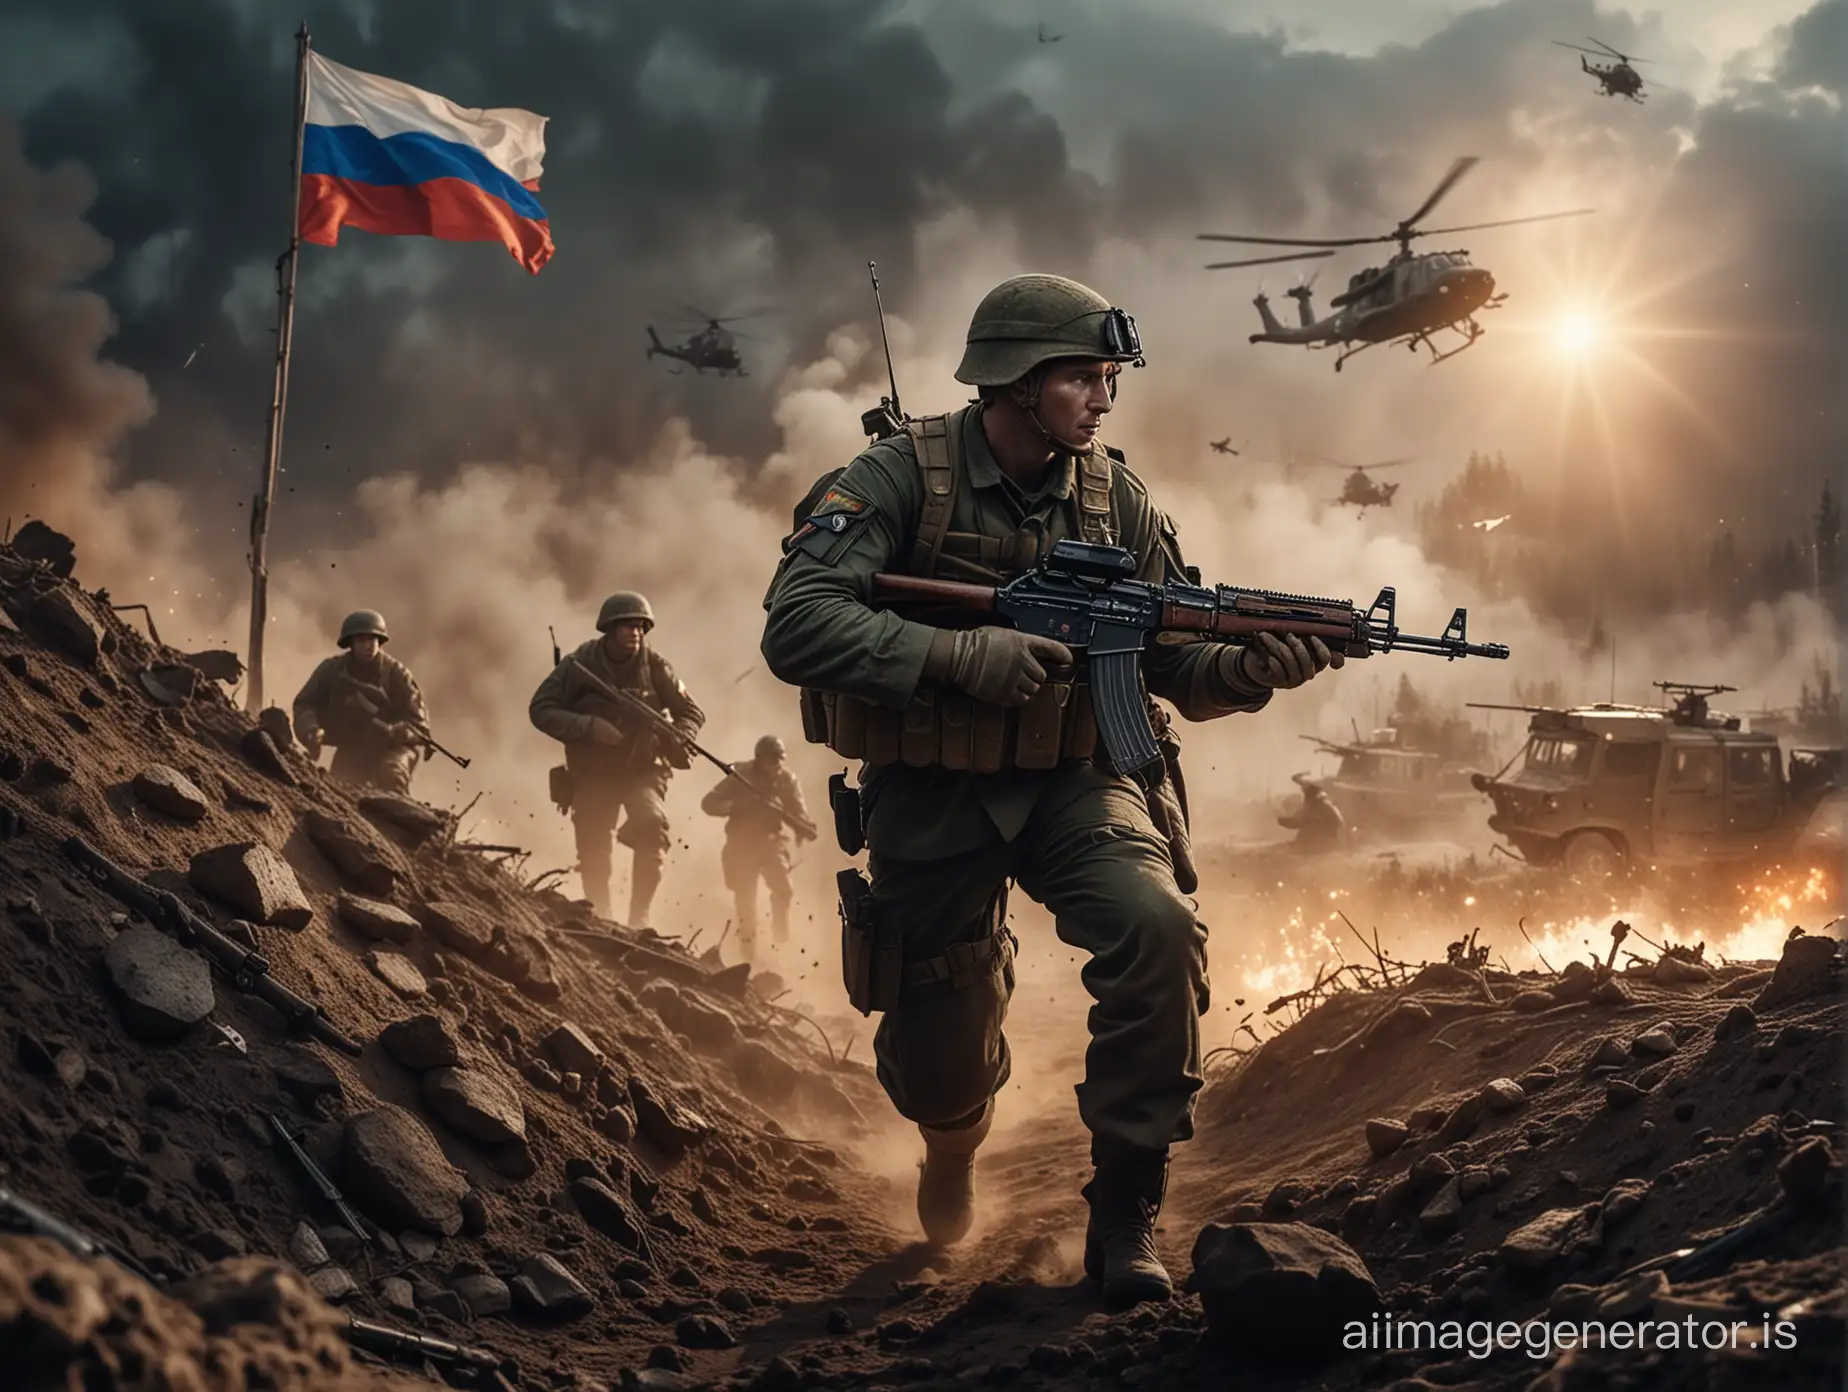 Modern-Russian-Soldier-in-Action-with-Helicopter-Support-and-National-Pride